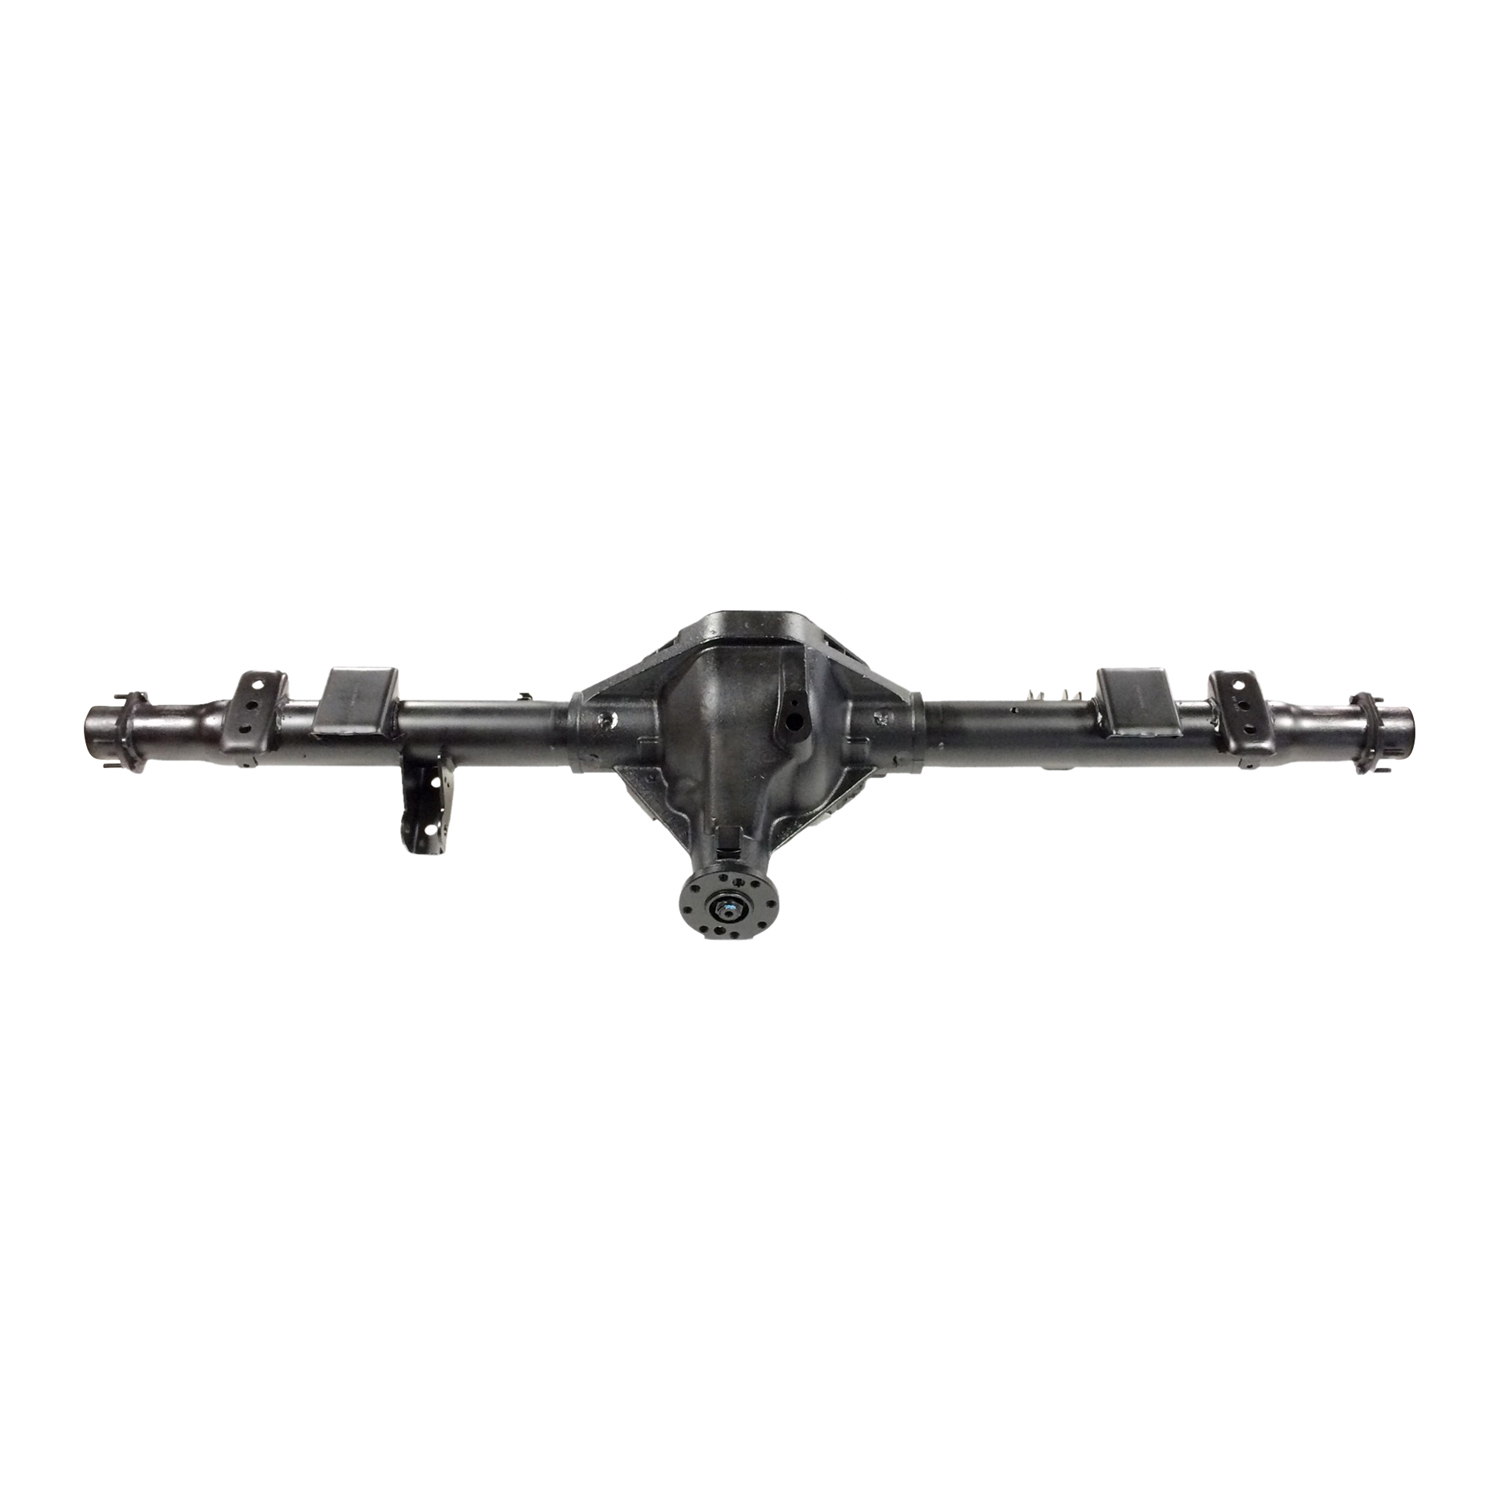 Remanufactured Complete Axle Assembly for Chy 9.25" 02-05 D1500 3.90 , 2wd, Posi LSD